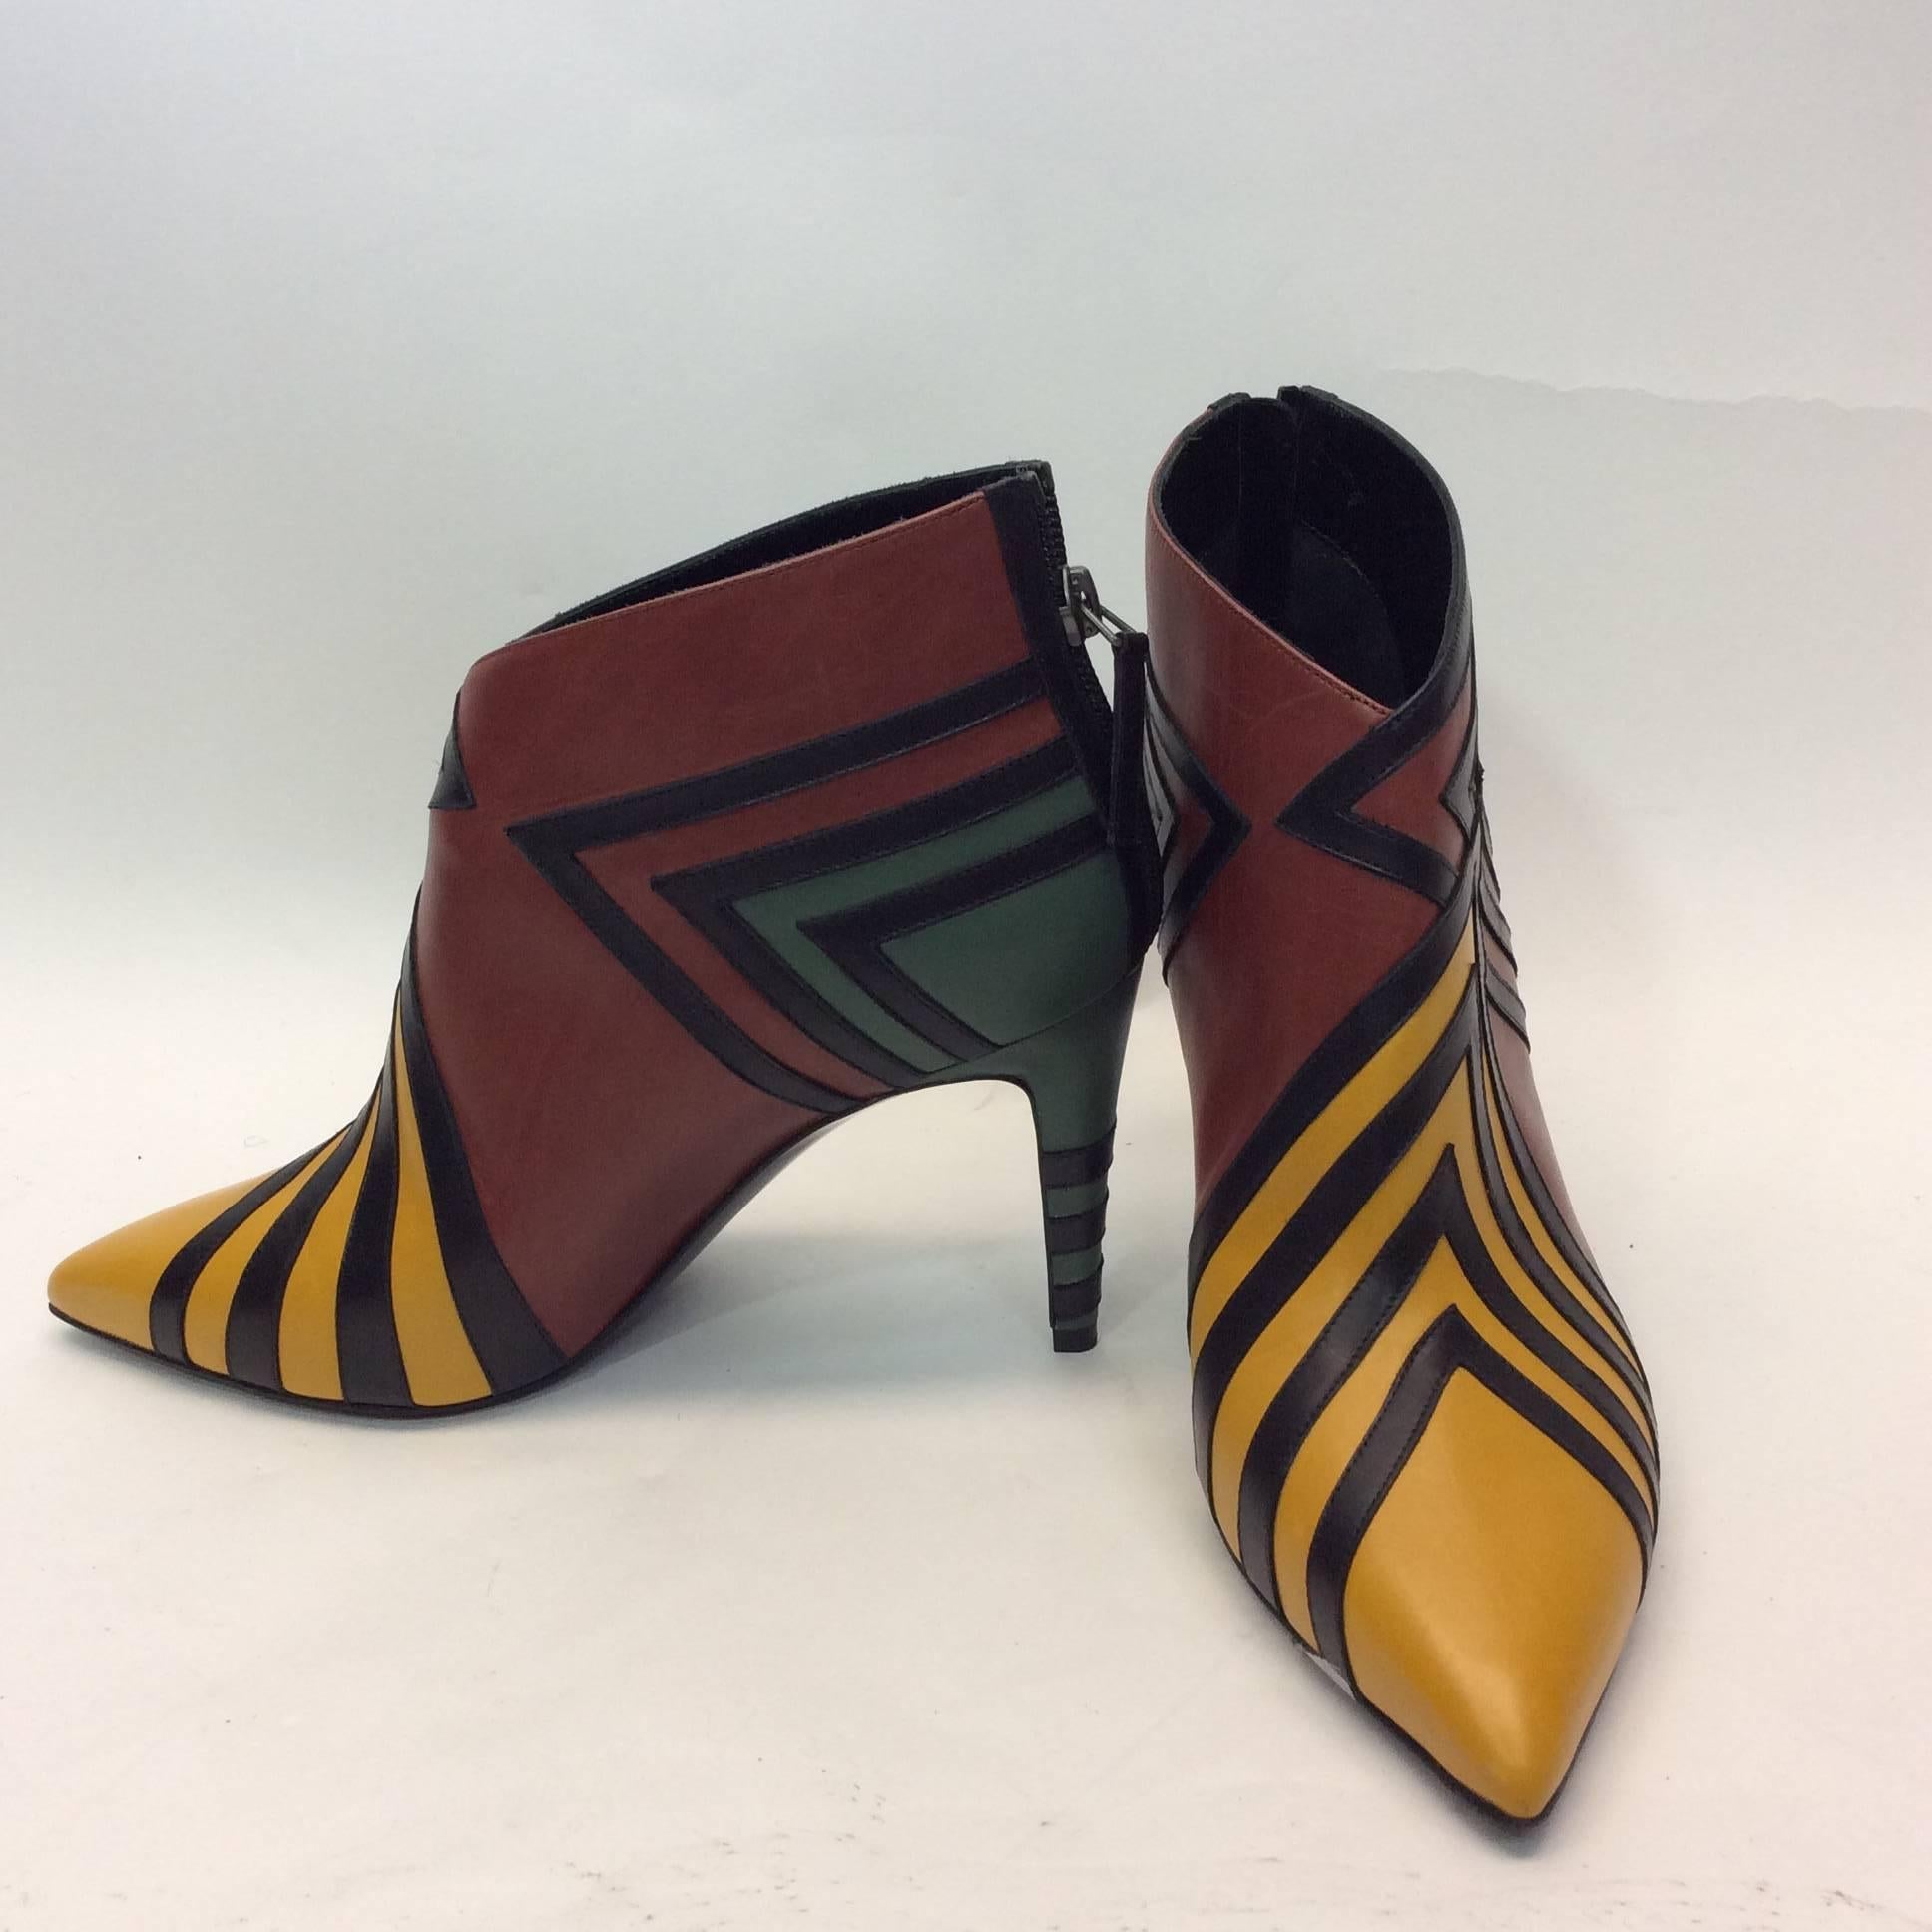 Pierre Hardy Geometric Multicolored Leather Bootie In Excellent Condition For Sale In Narberth, PA